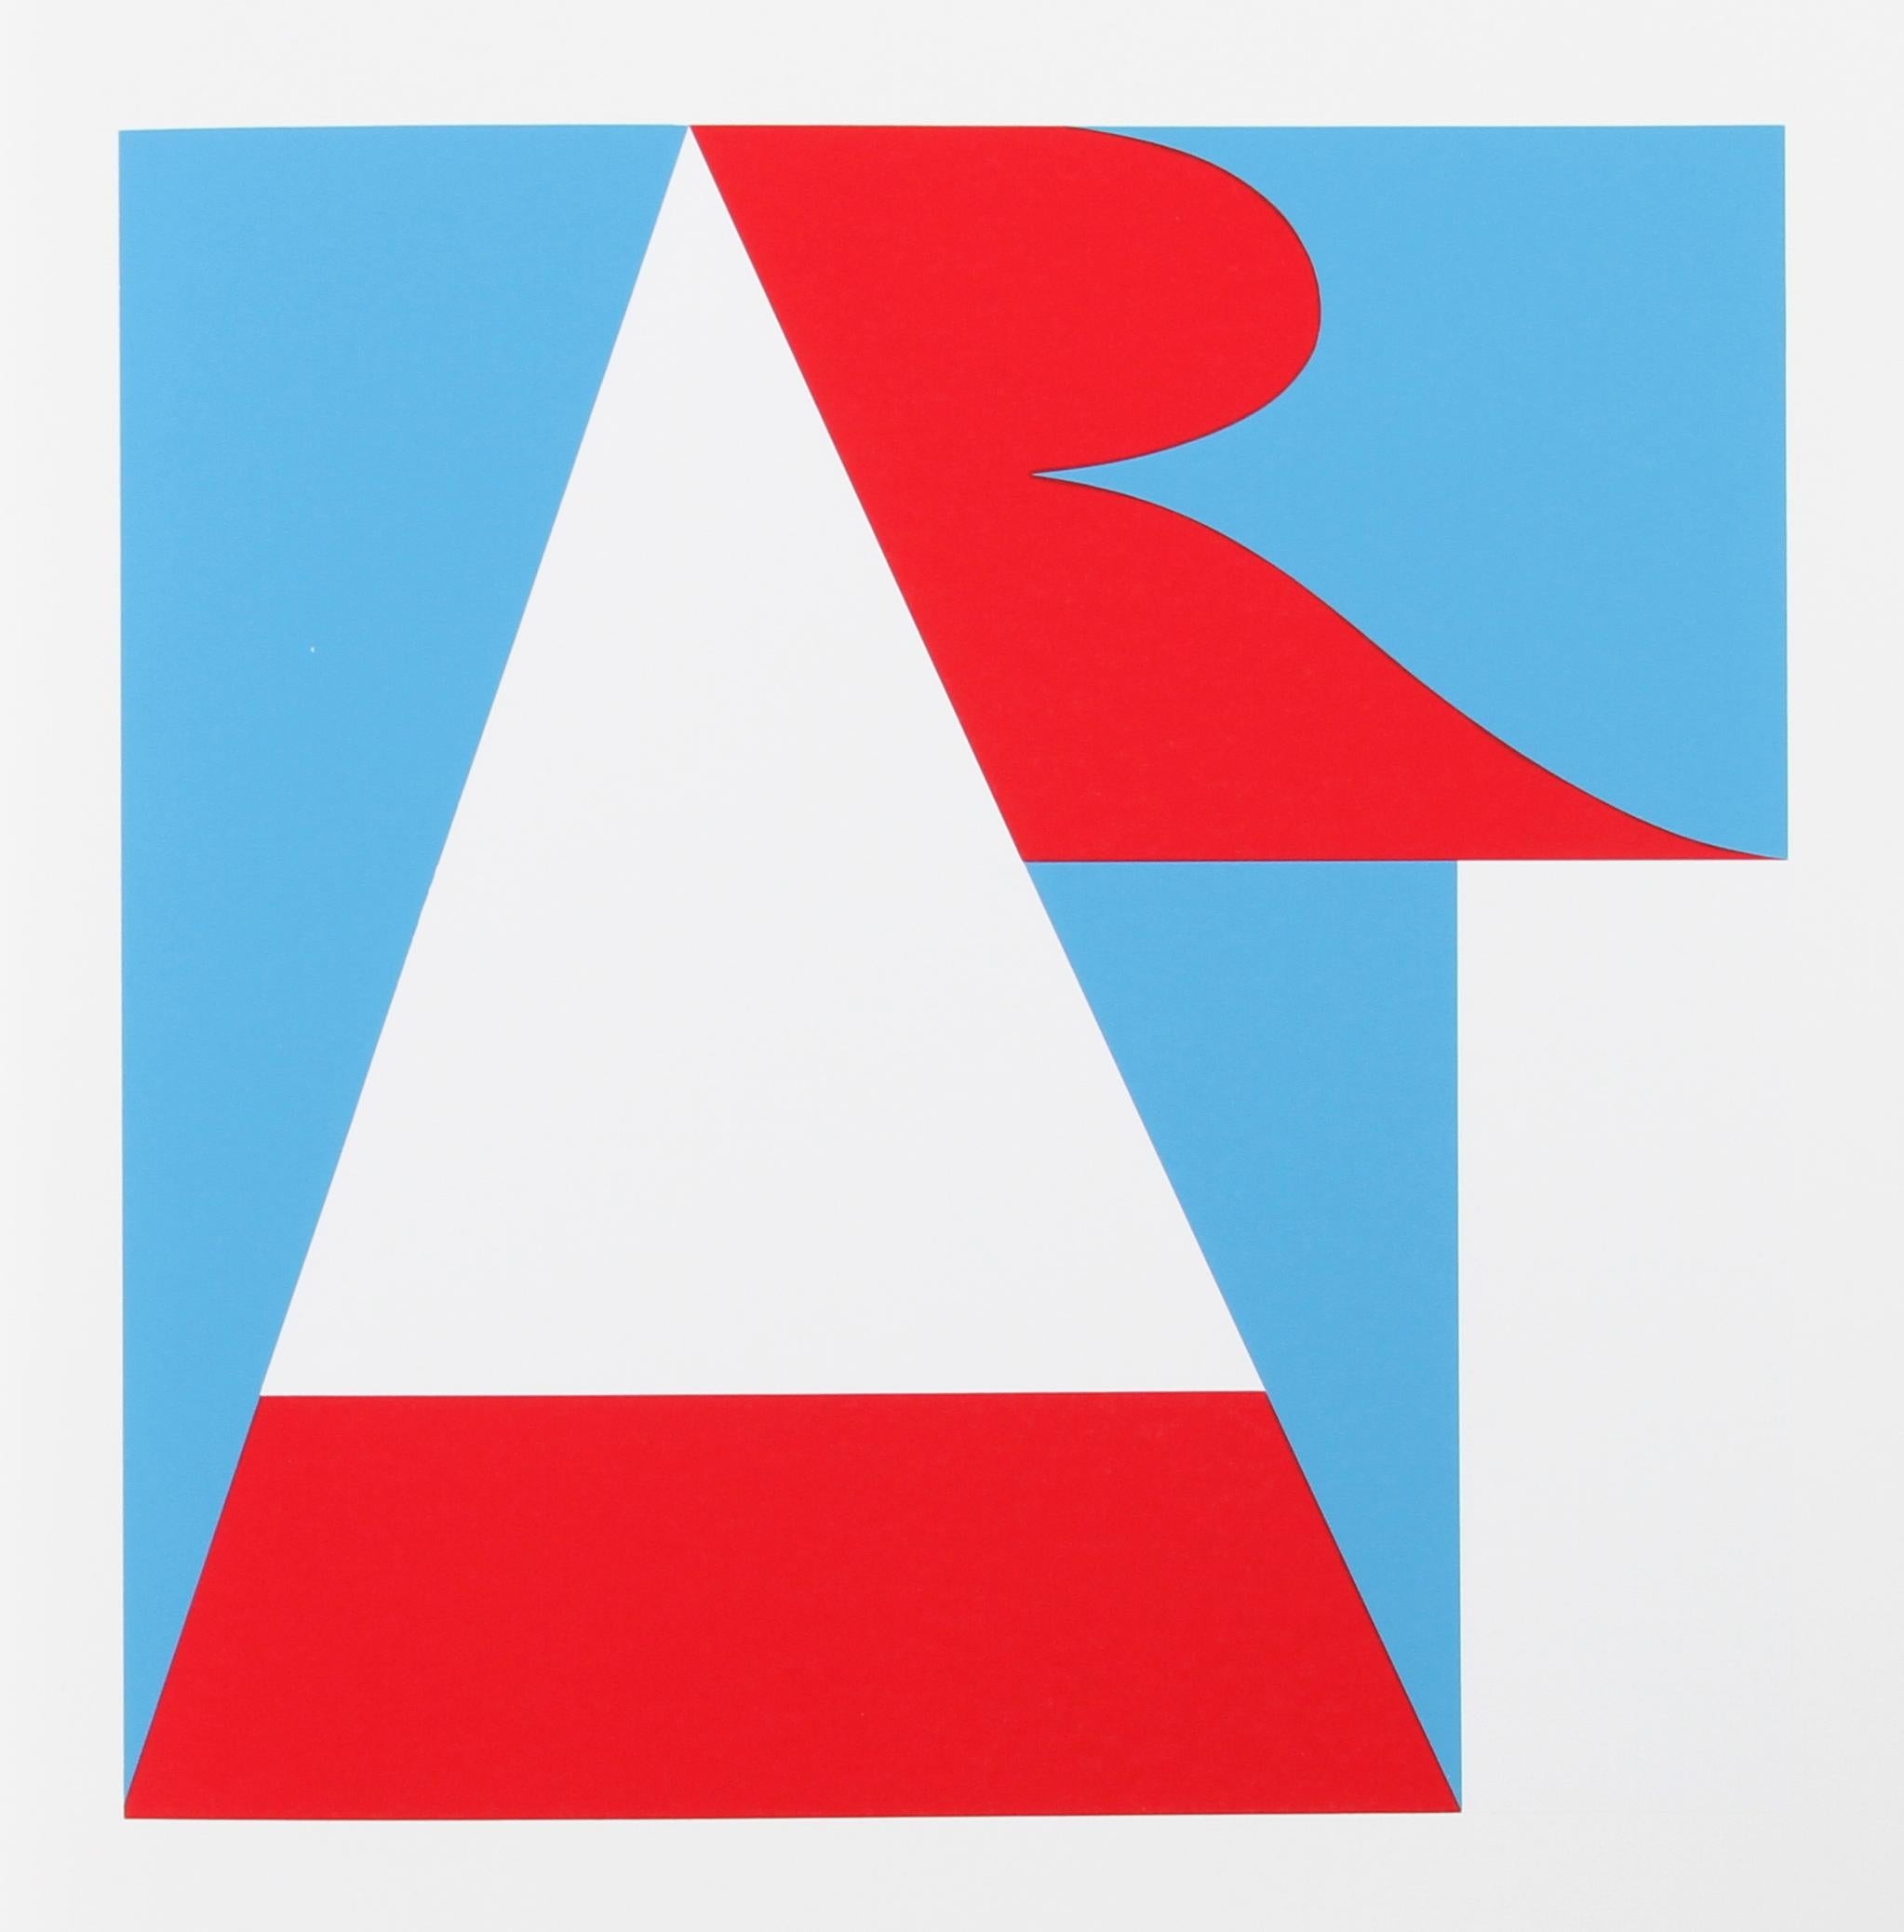 "Art", from the American Dream Portfolio by Robert Indiana